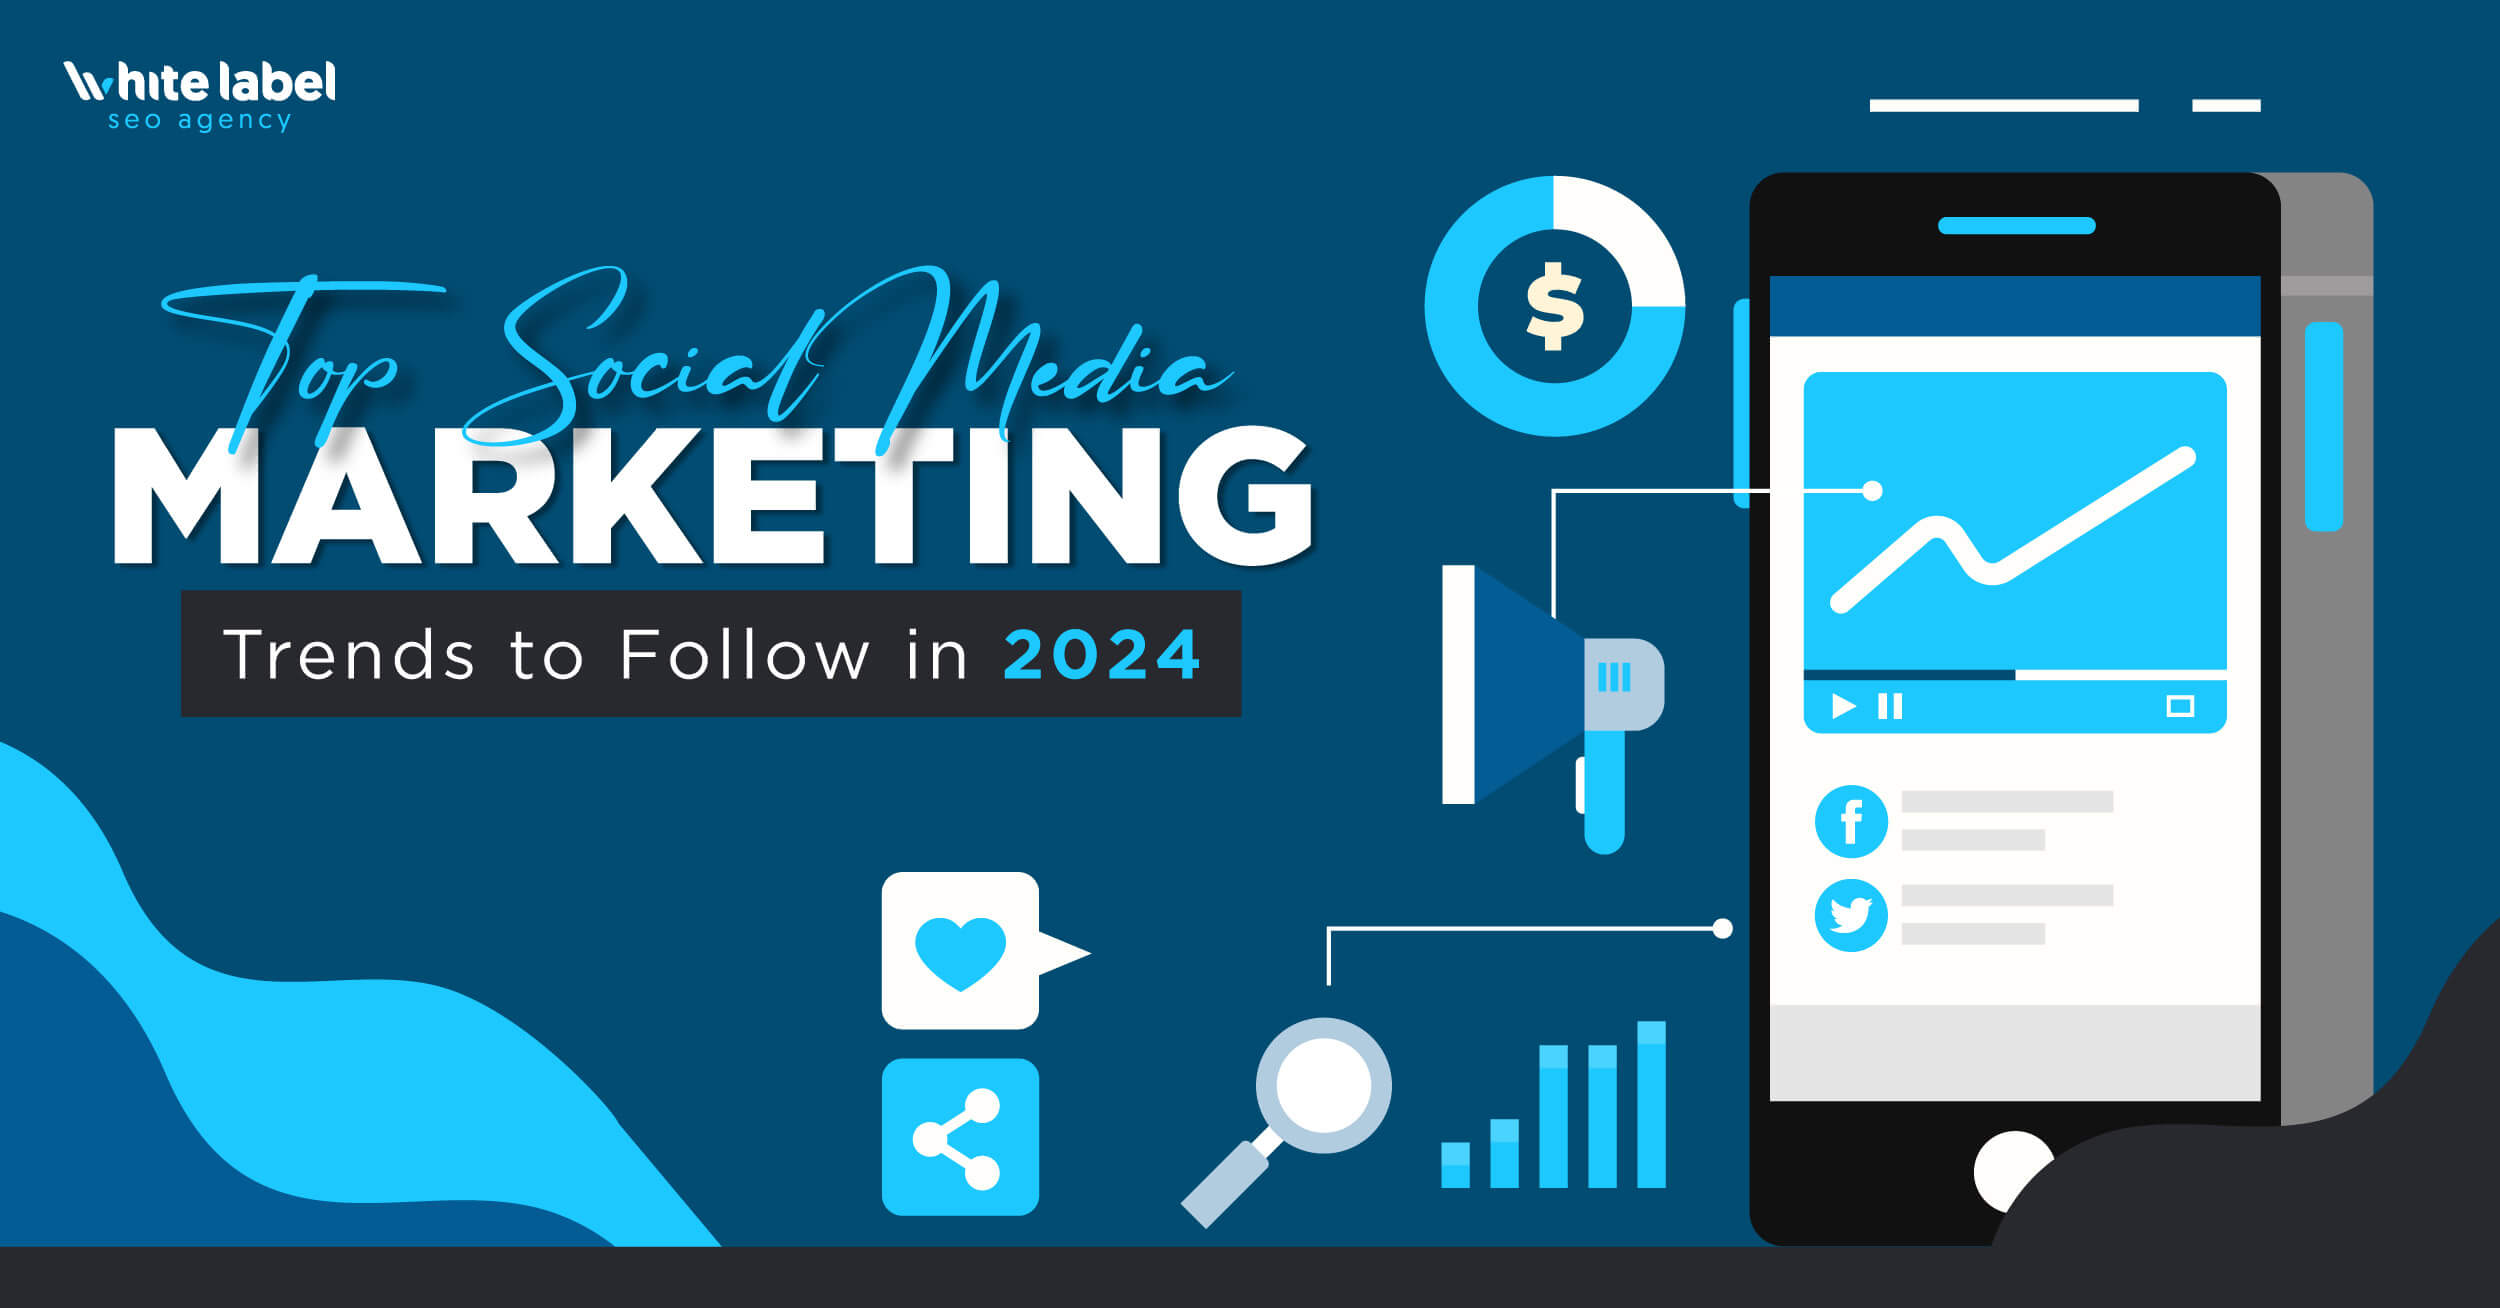 Top Social Media Marketing Trends to Follow in 2024 (Infographic)